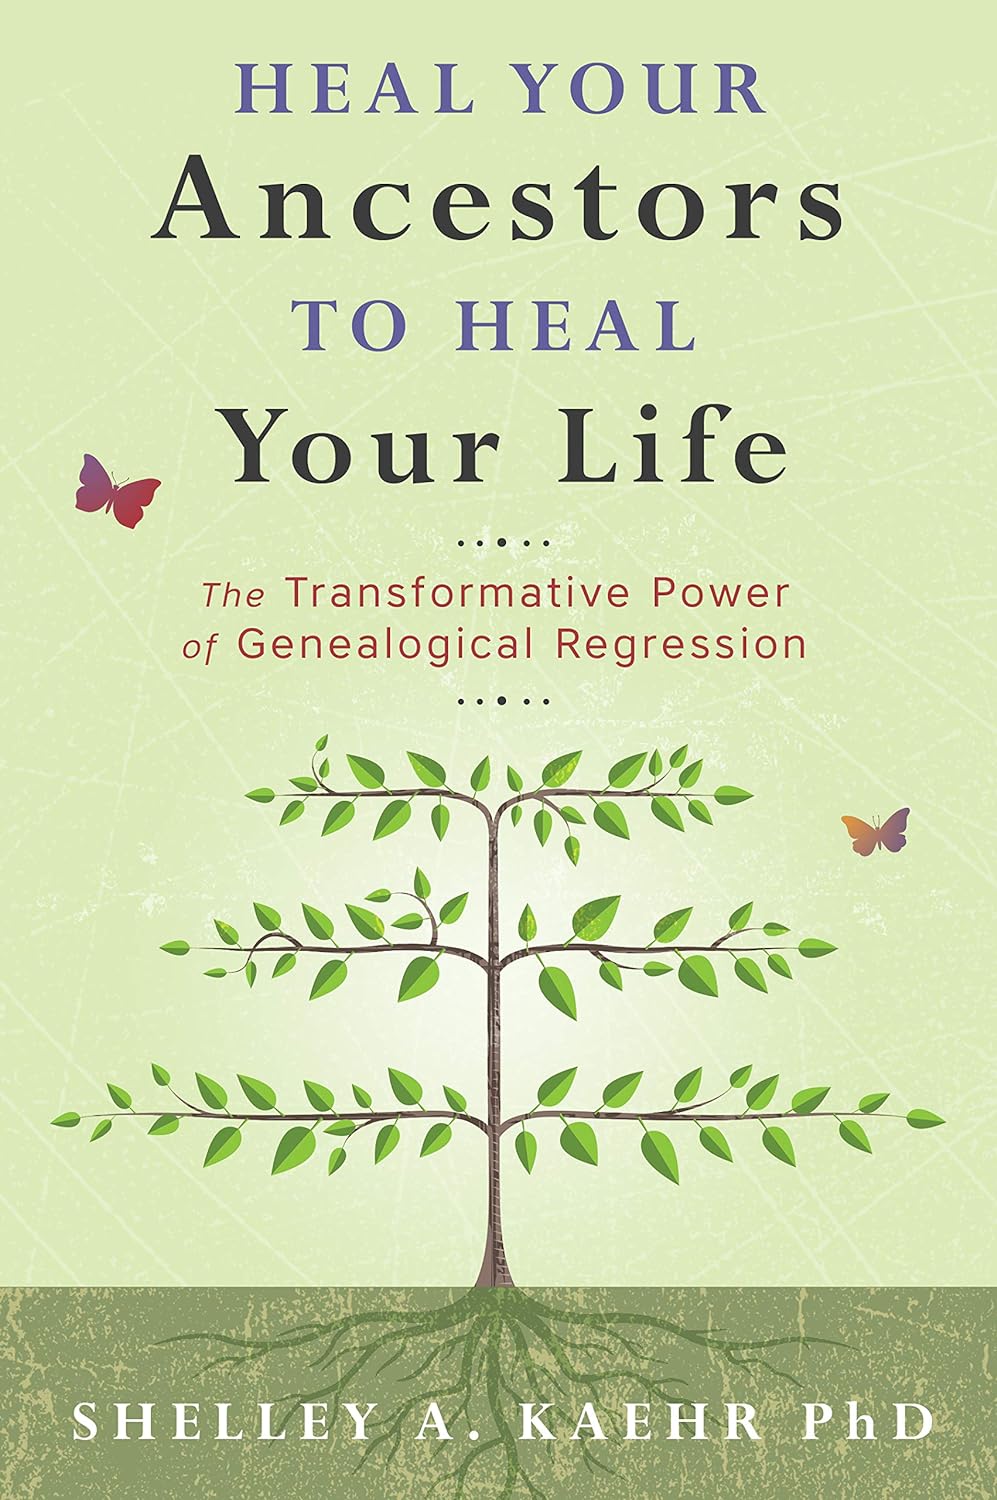 Heal Your Ancestors to Heal Your Life: The Transformative Power of Genealogical Regression